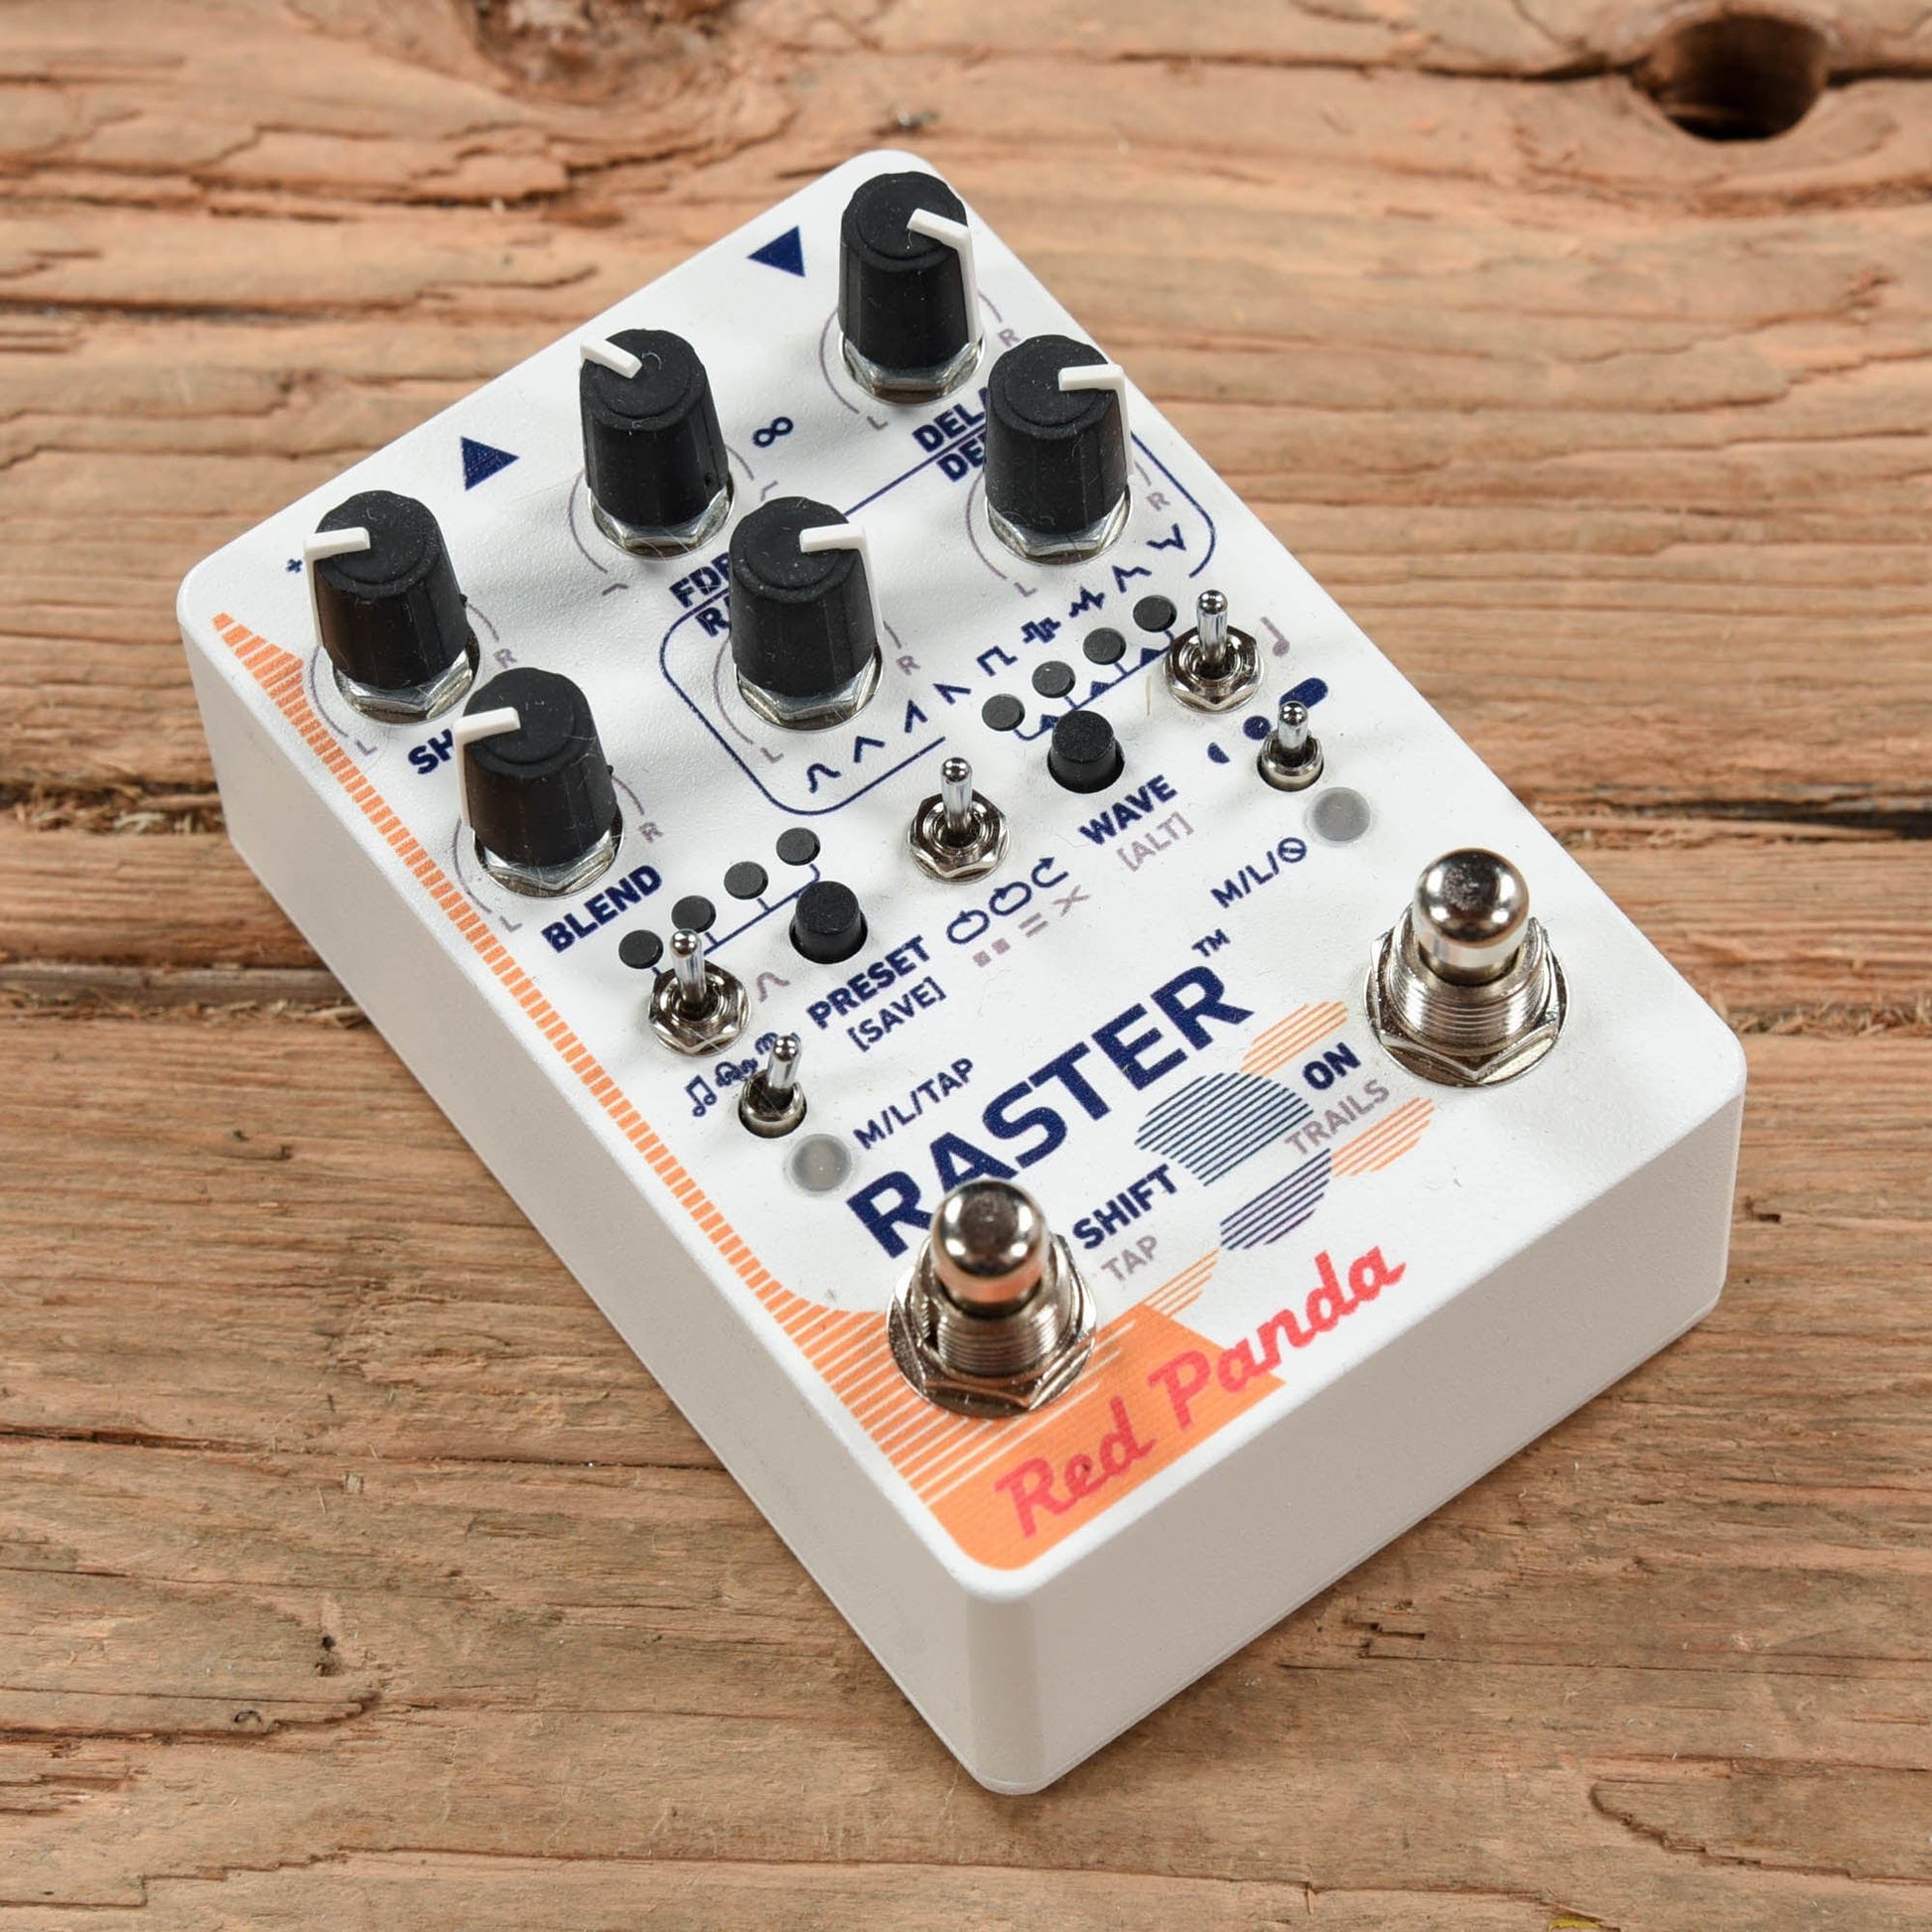 Red Panda Raster 2 Effects and Pedals / Delay